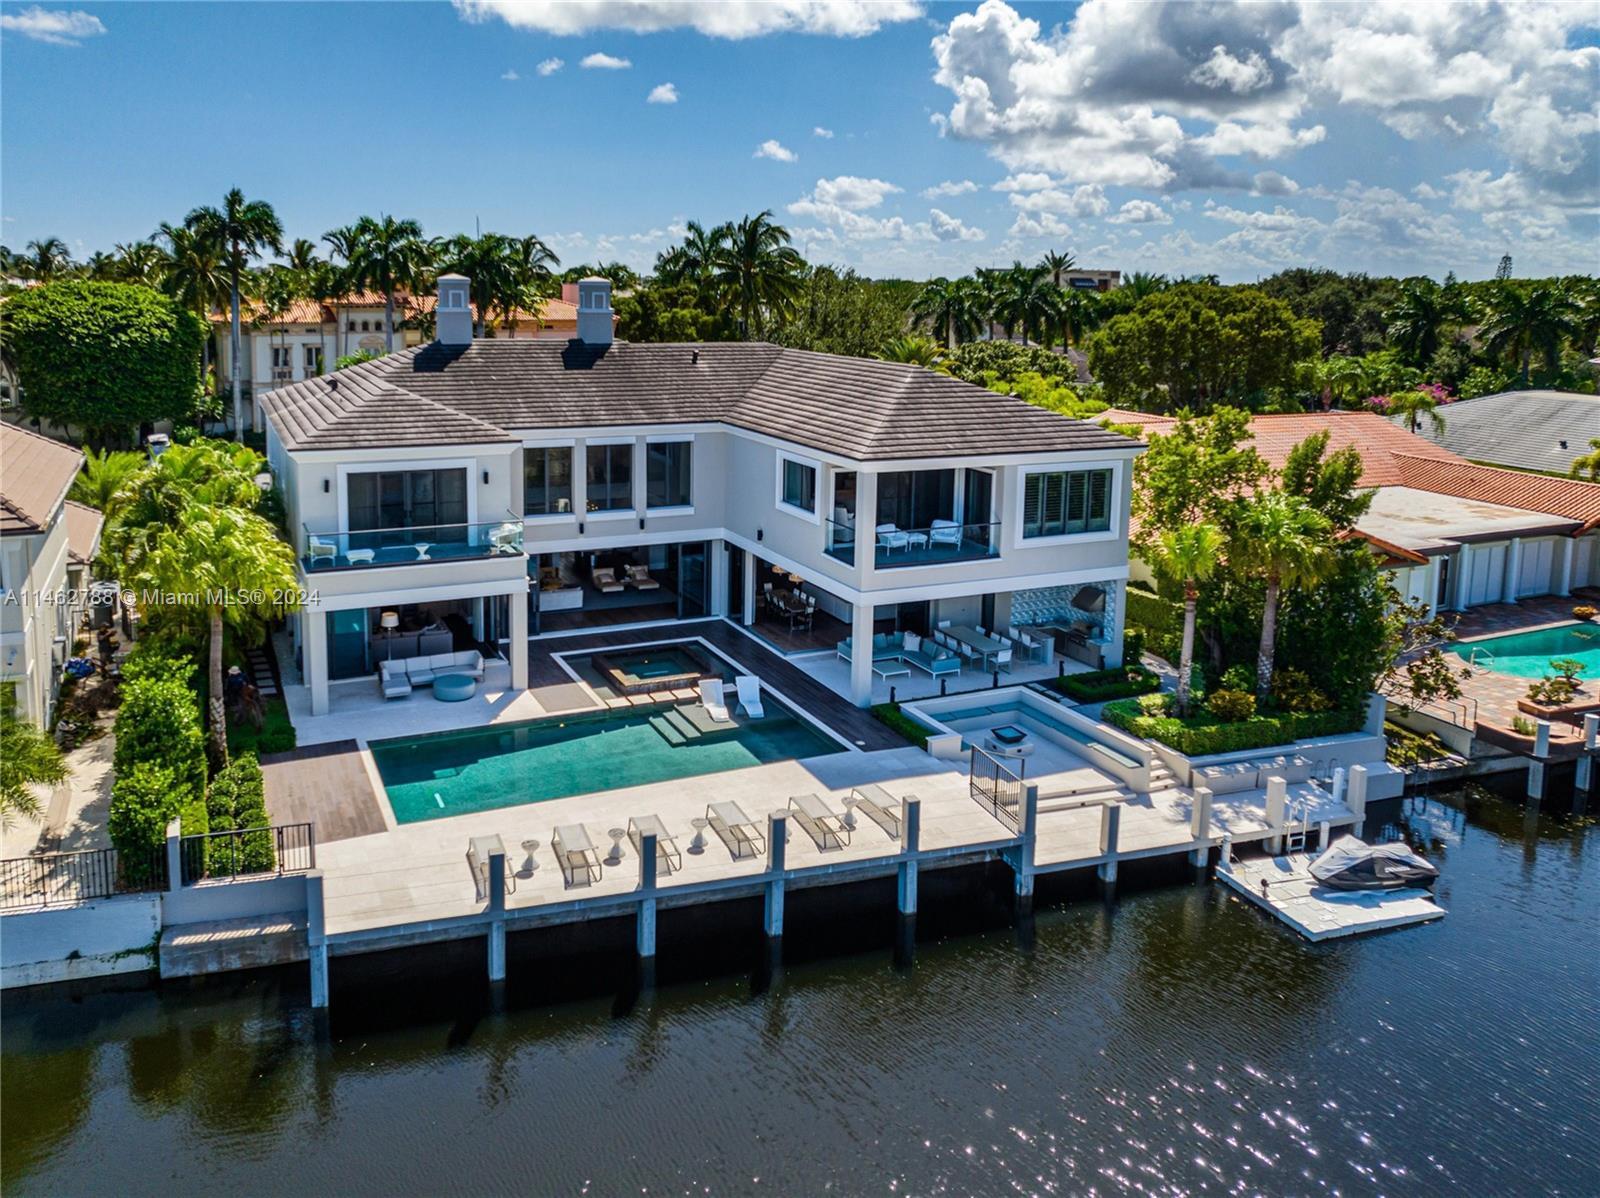 Enjoy this contemporary two-story home with over 100+ feet on the water. 
The Sanctuary, distinguis